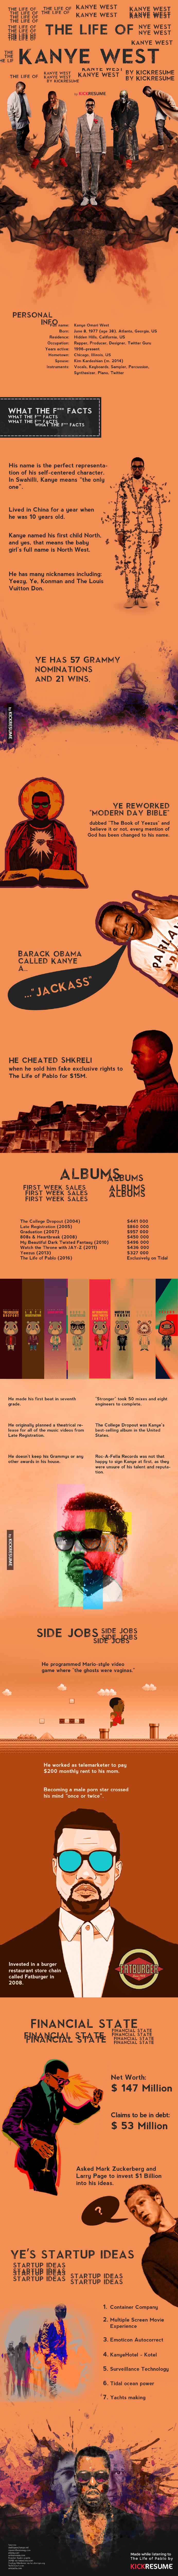 Life of Kanye West - Music Infographic